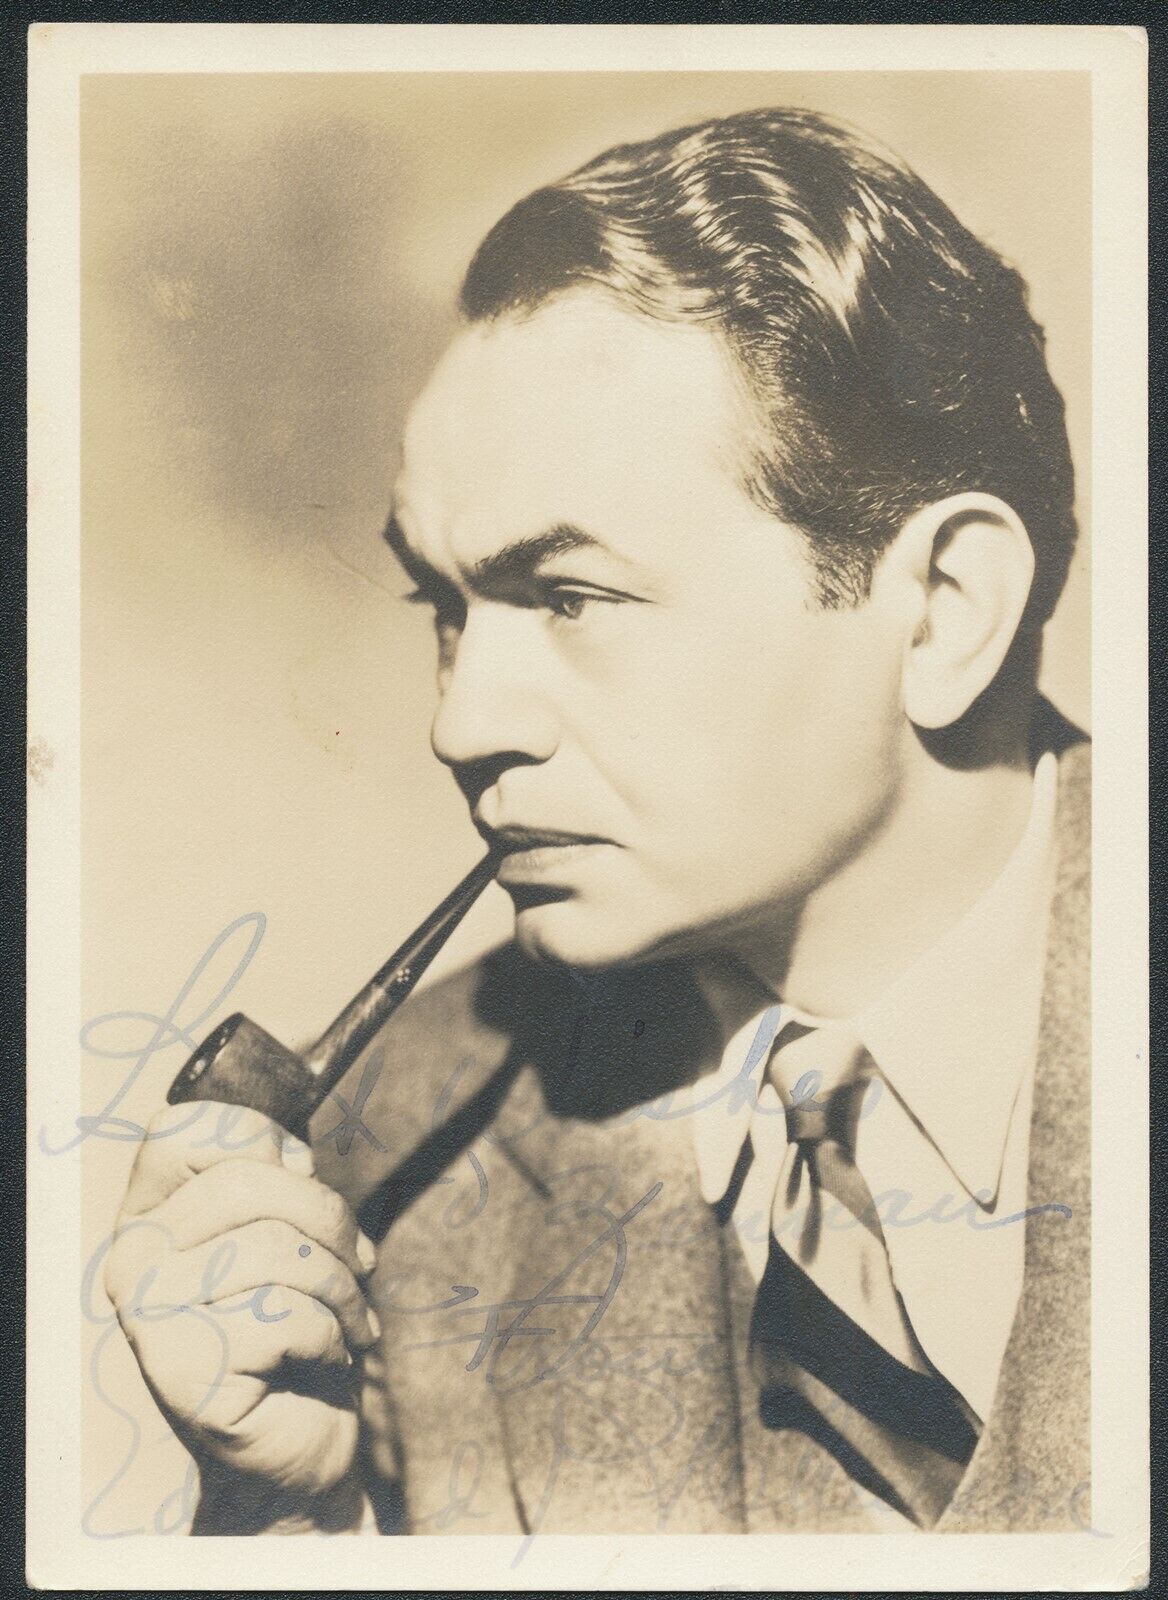 EDWARD G. ROBINSON AUTOGRAPH SIGNED \'BEST WISHES \' 5x7 VINTAGE SEPIA PHOTO